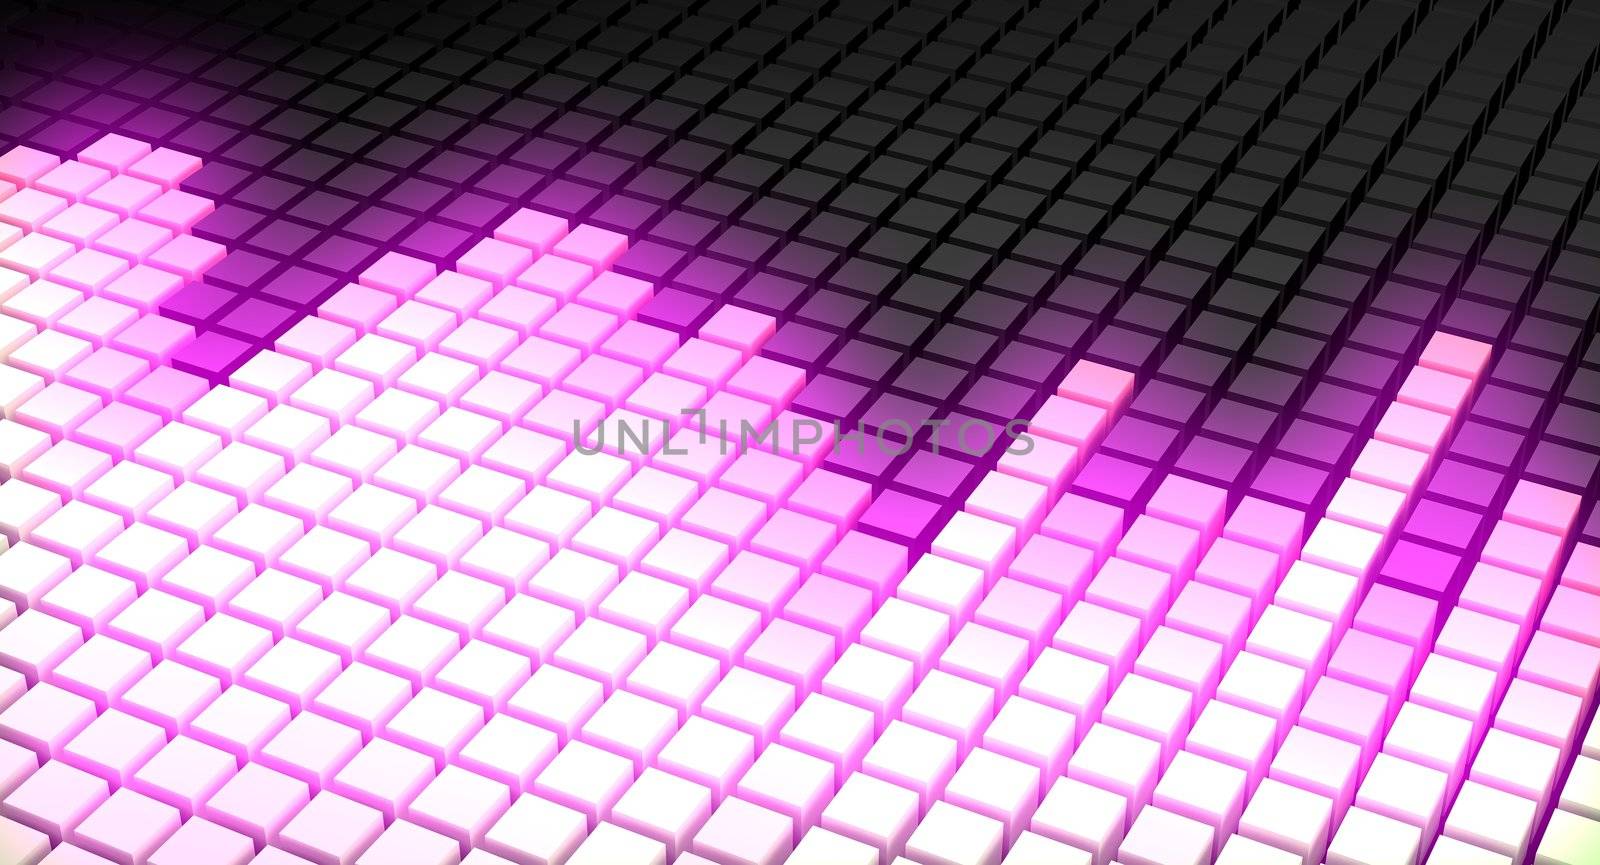 Concept of colorful graphic equalizer display as used in music mixing or monitoring devices. Rendered in diagonal perspective view in bright color scheme with peaks intensively glowing in pink color.